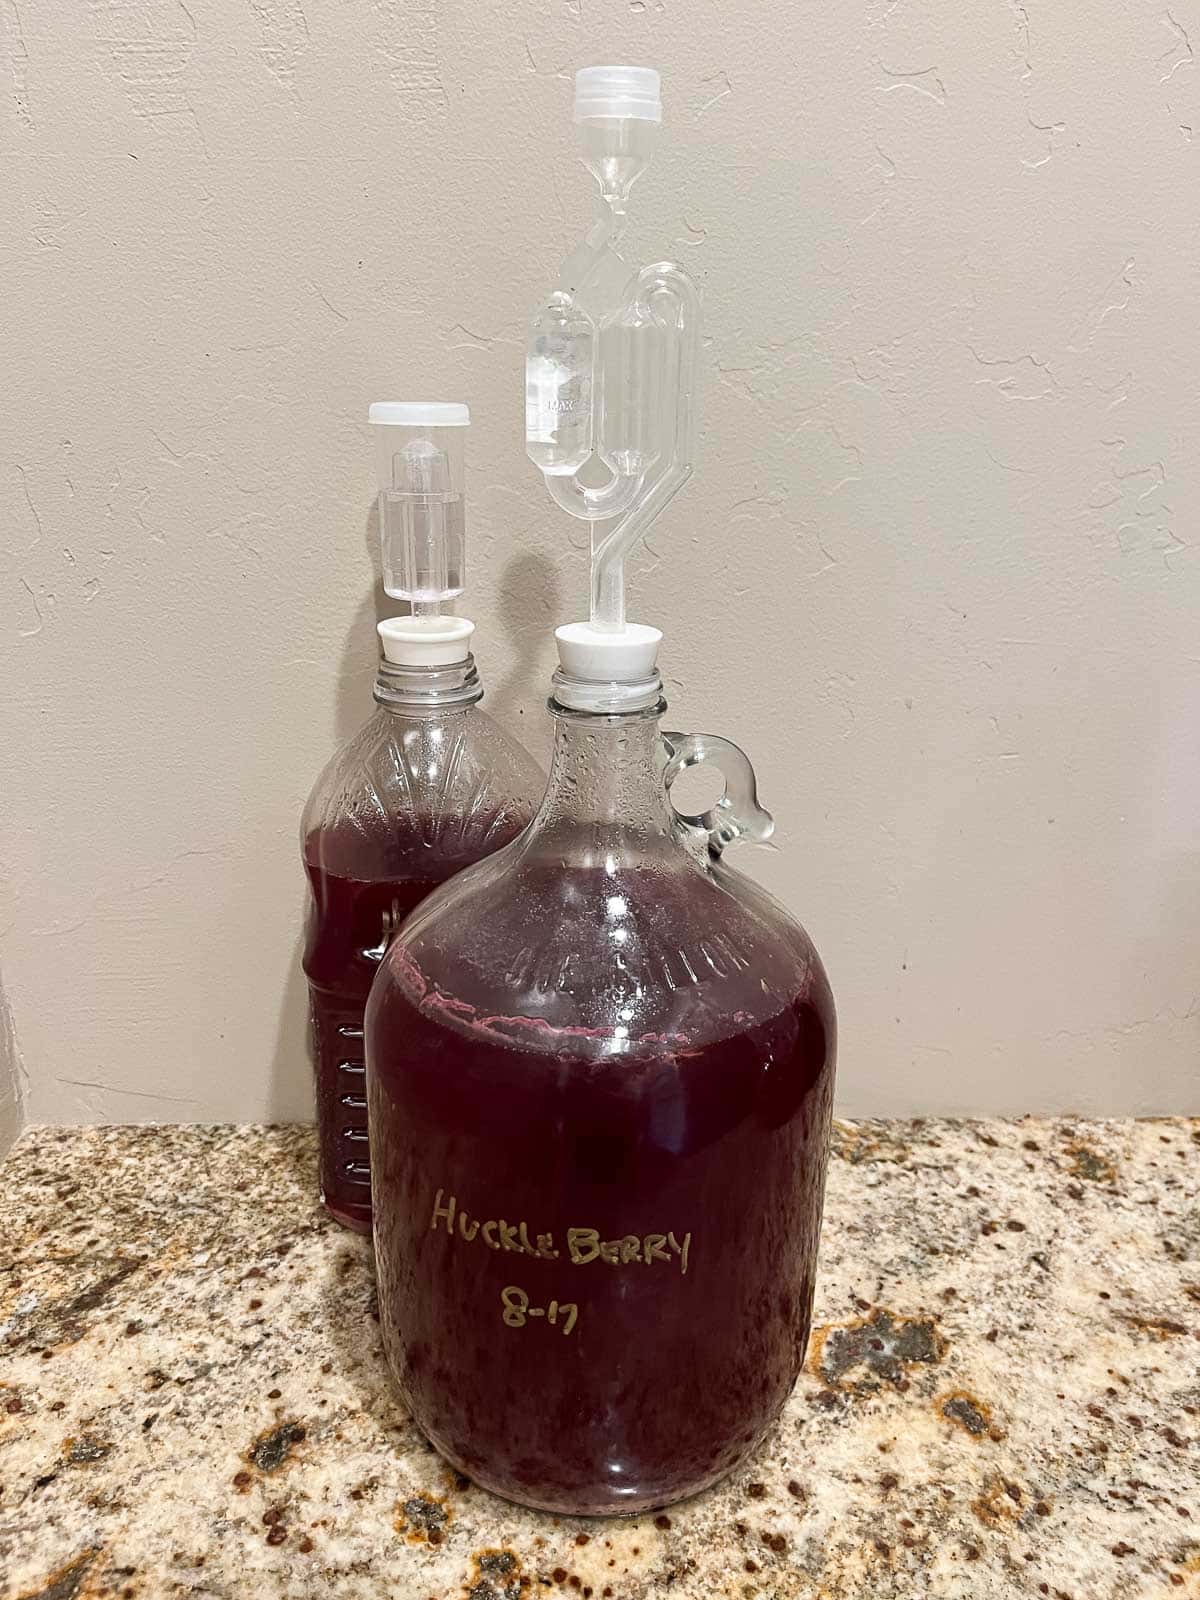 huckleberry wine in carboys fermenting